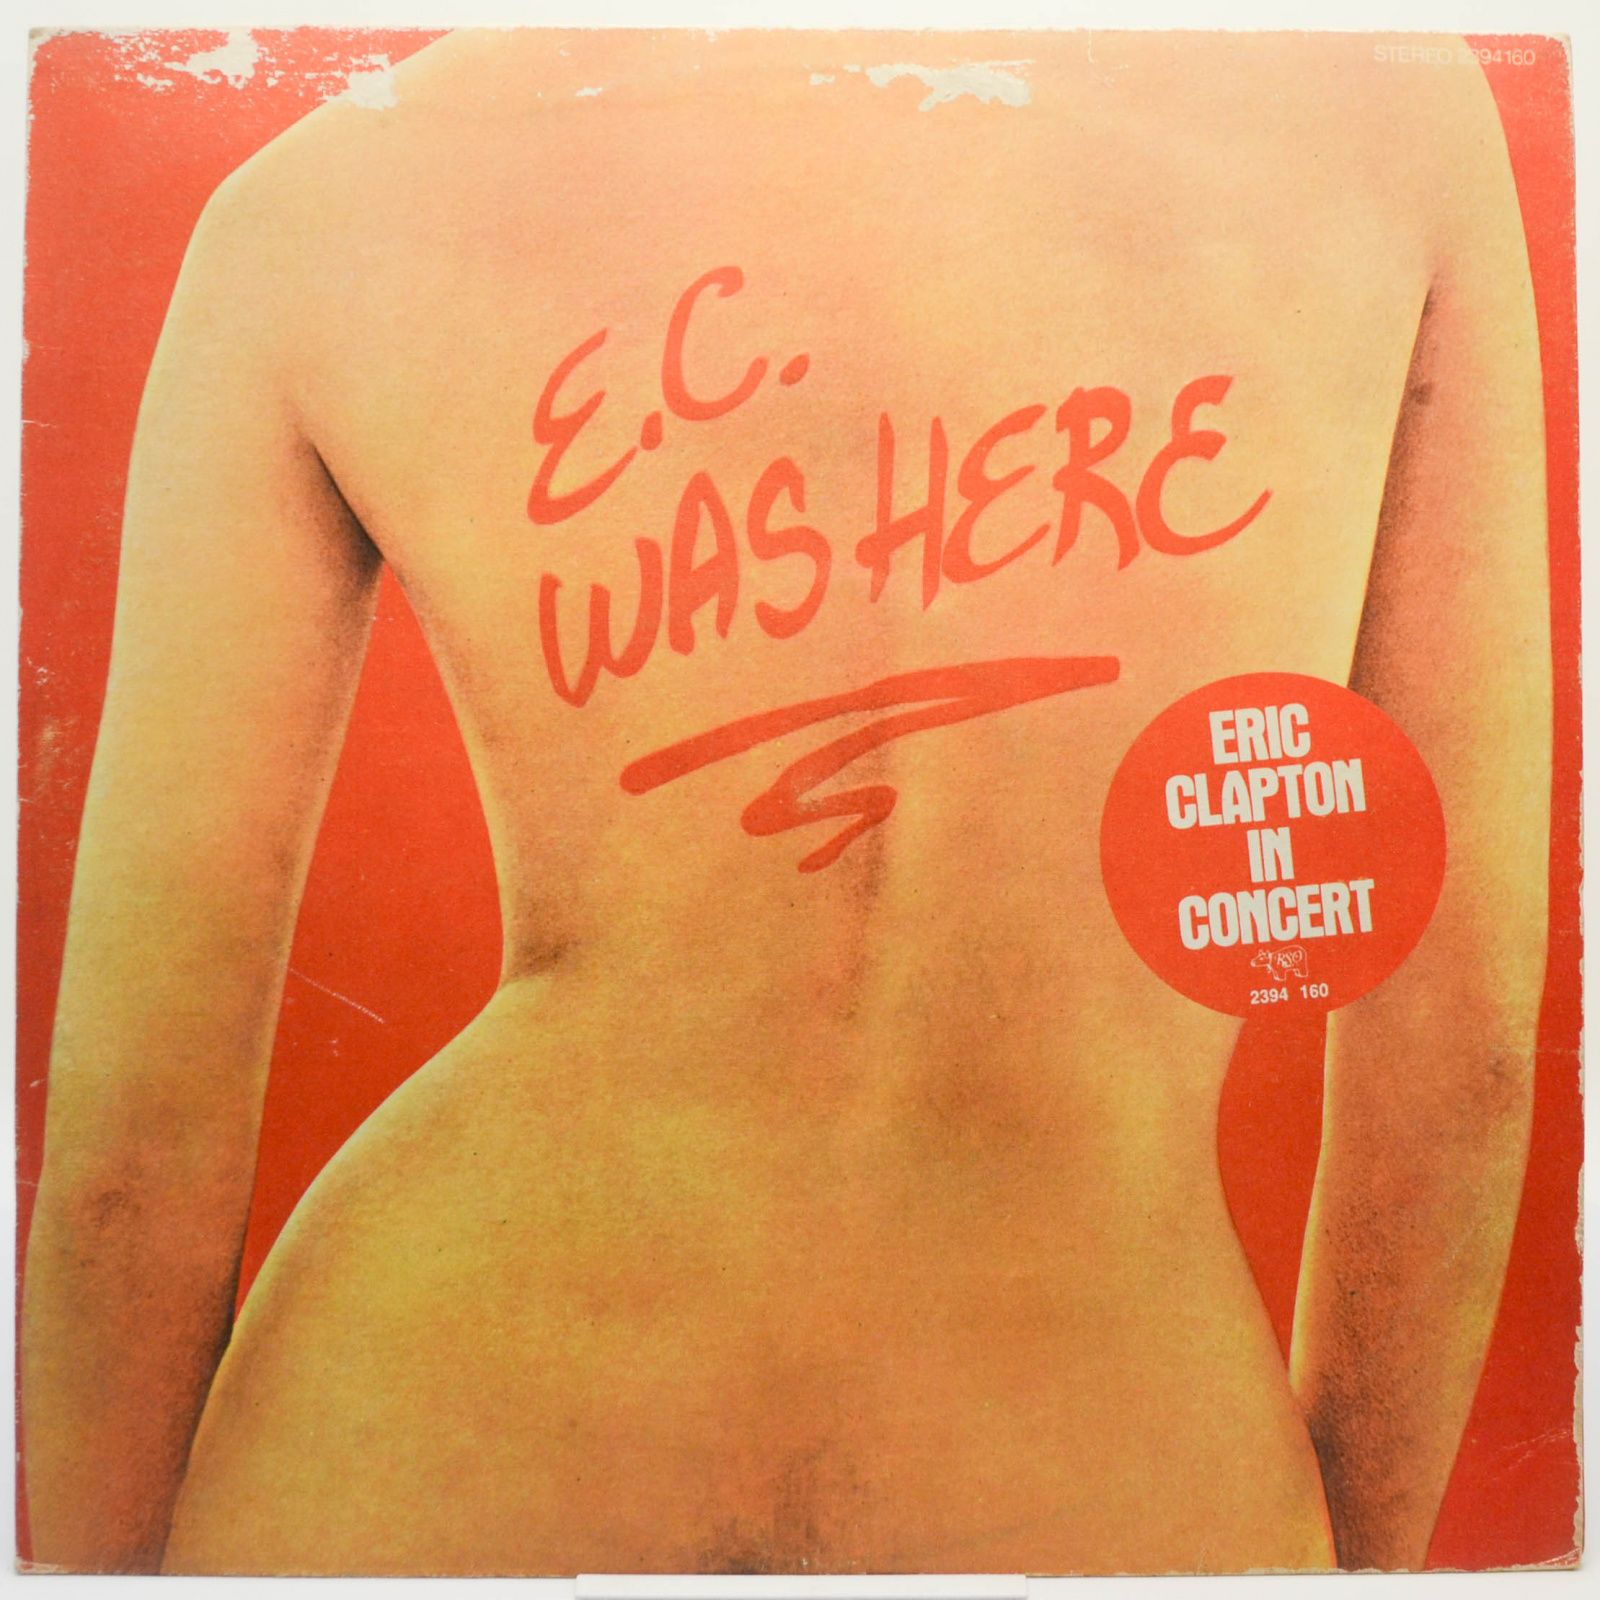 Eric Clapton — E.C. Was Here, 1975